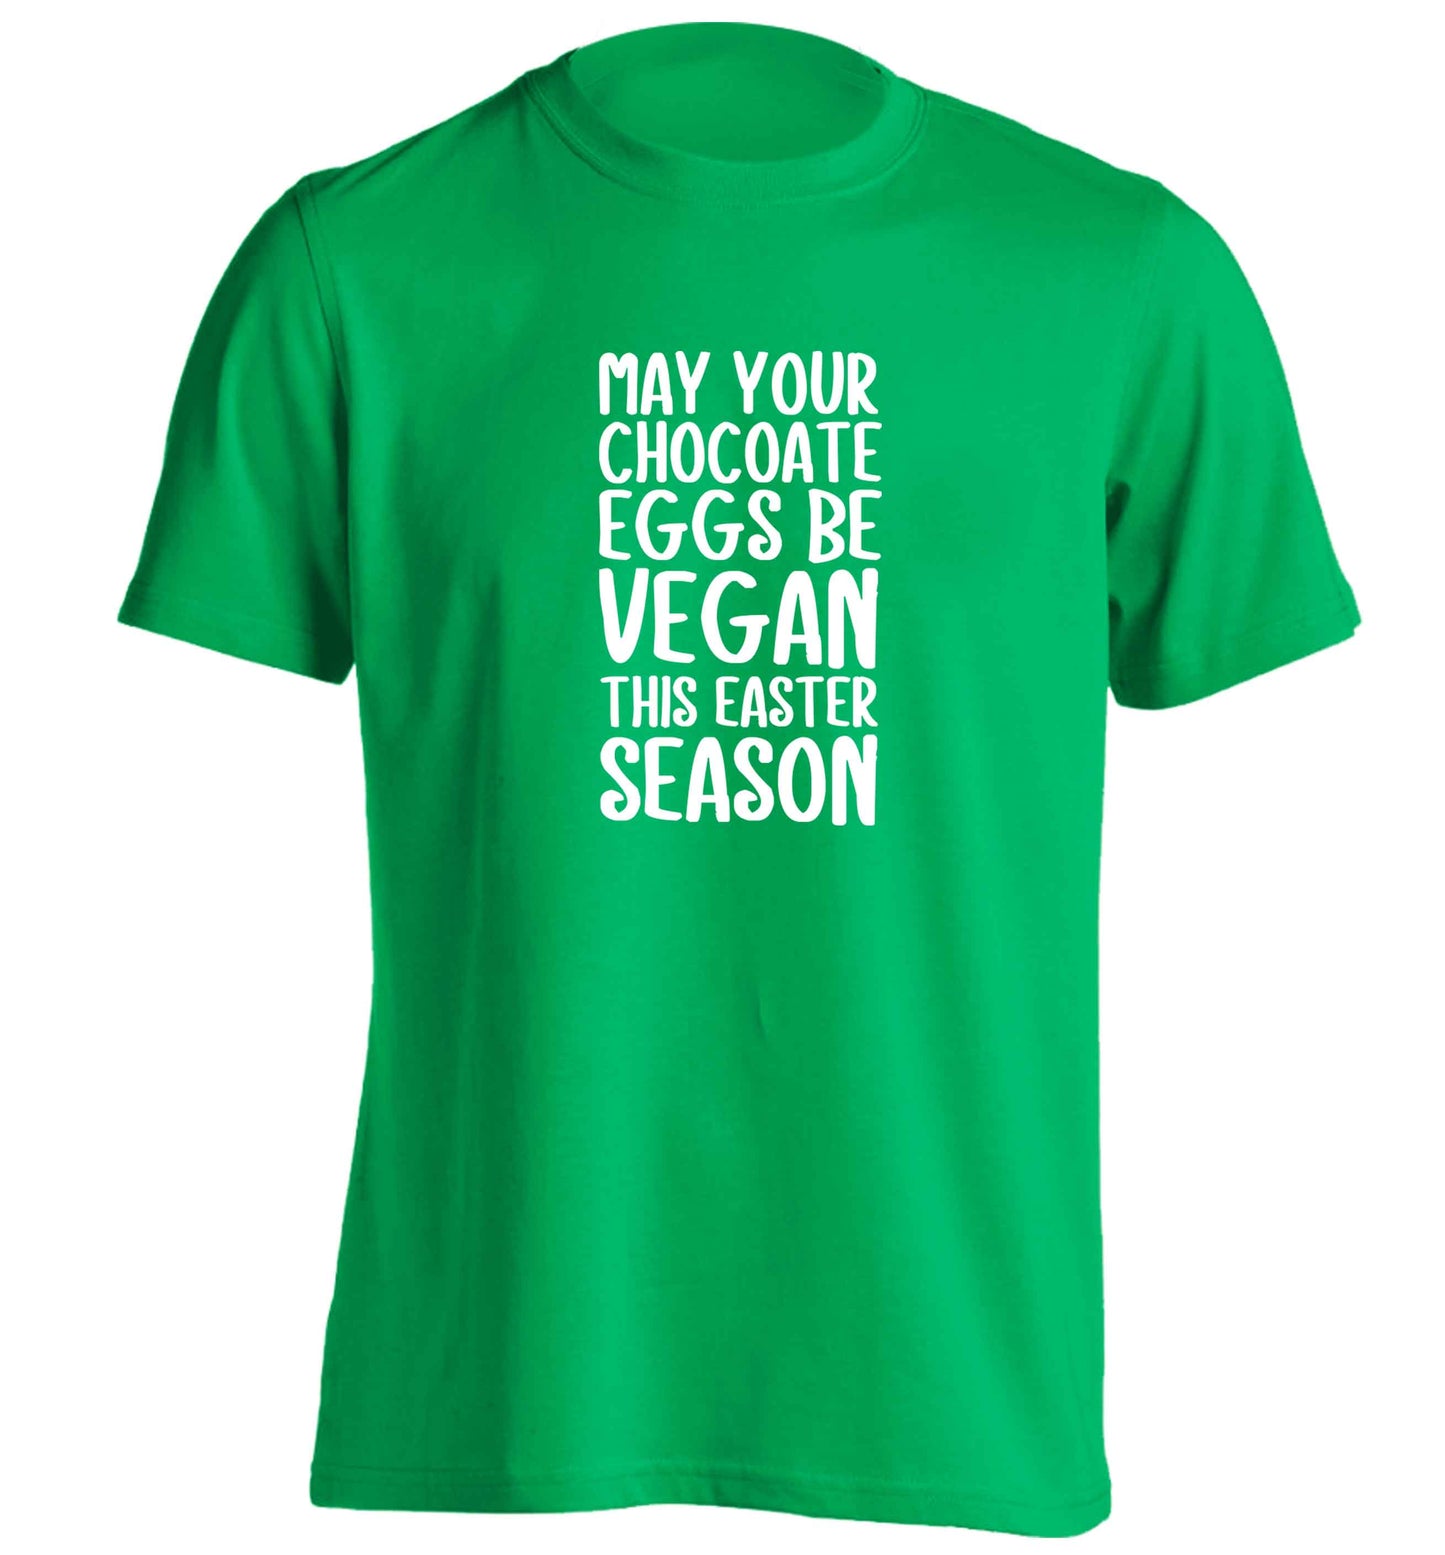 Easter bunny approved! Vegans will love this easter themed adults unisex green Tshirt 2XL